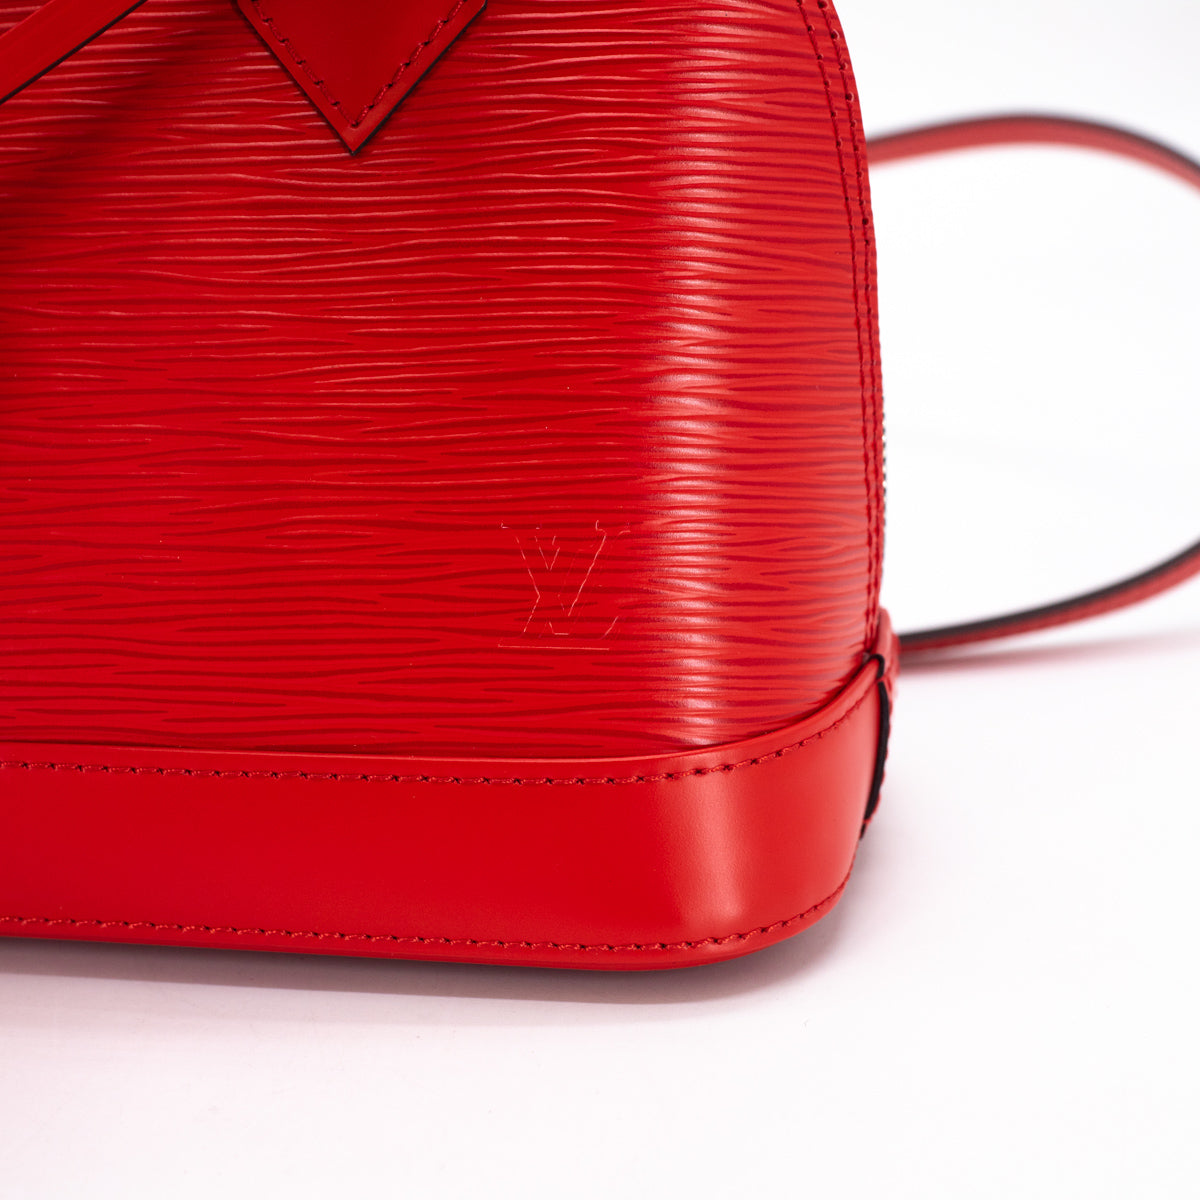 Louis VUITTON year 1996 - BAG Alma in red epi leather,…